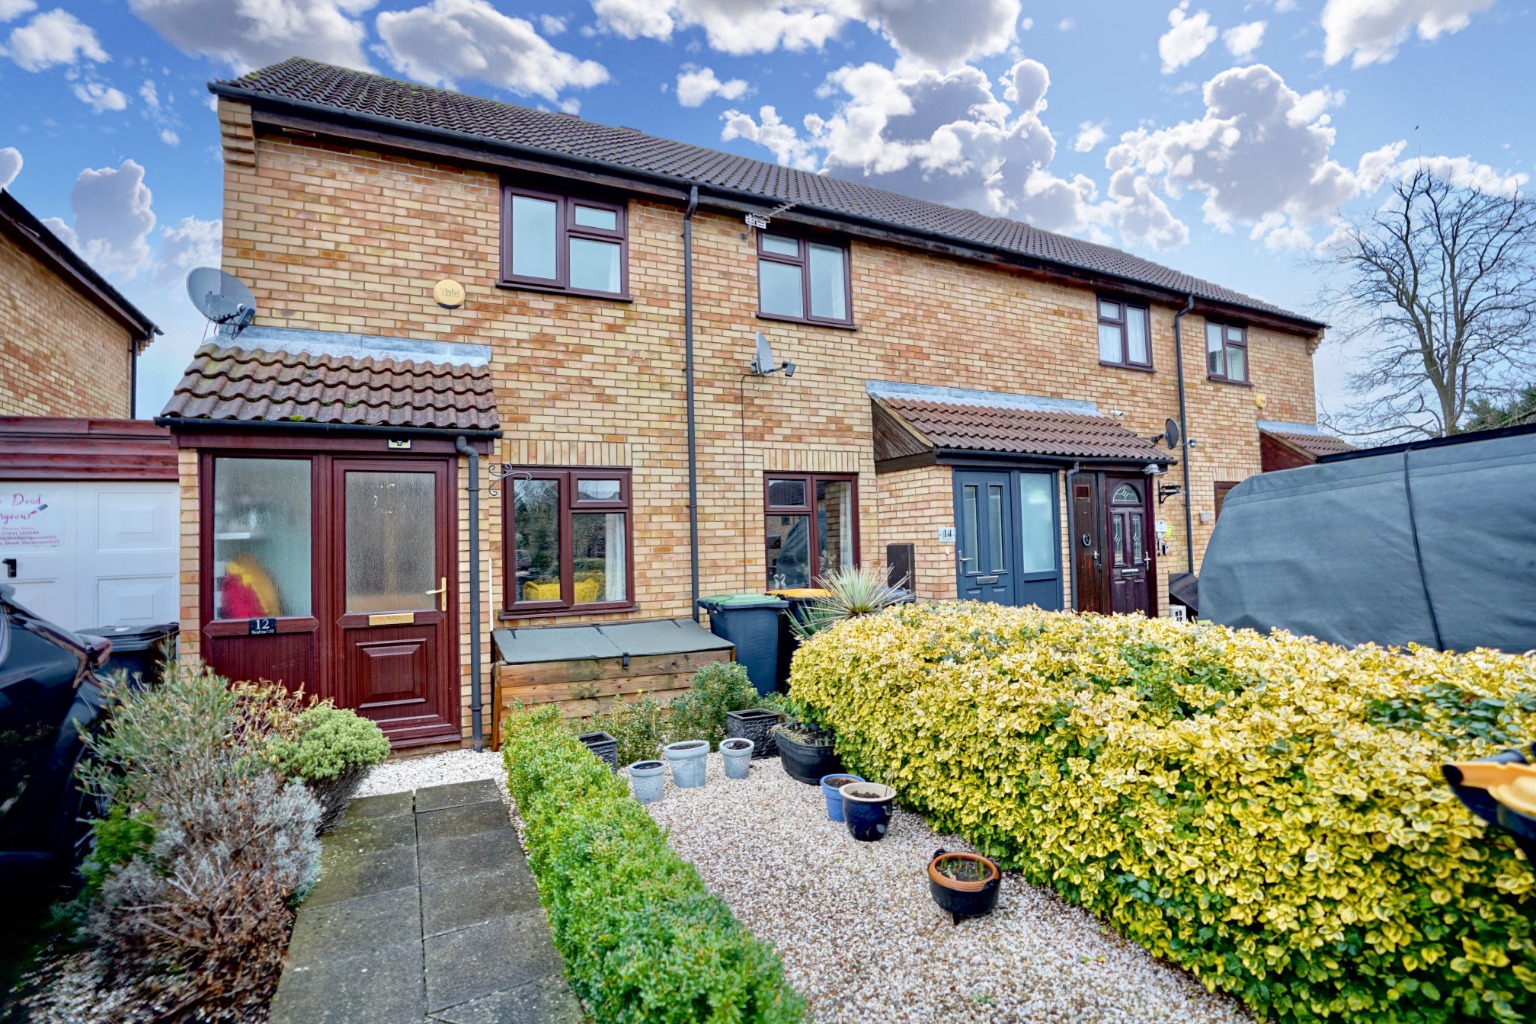 2 bed end of terrace house for sale in Swallowfield, MK44